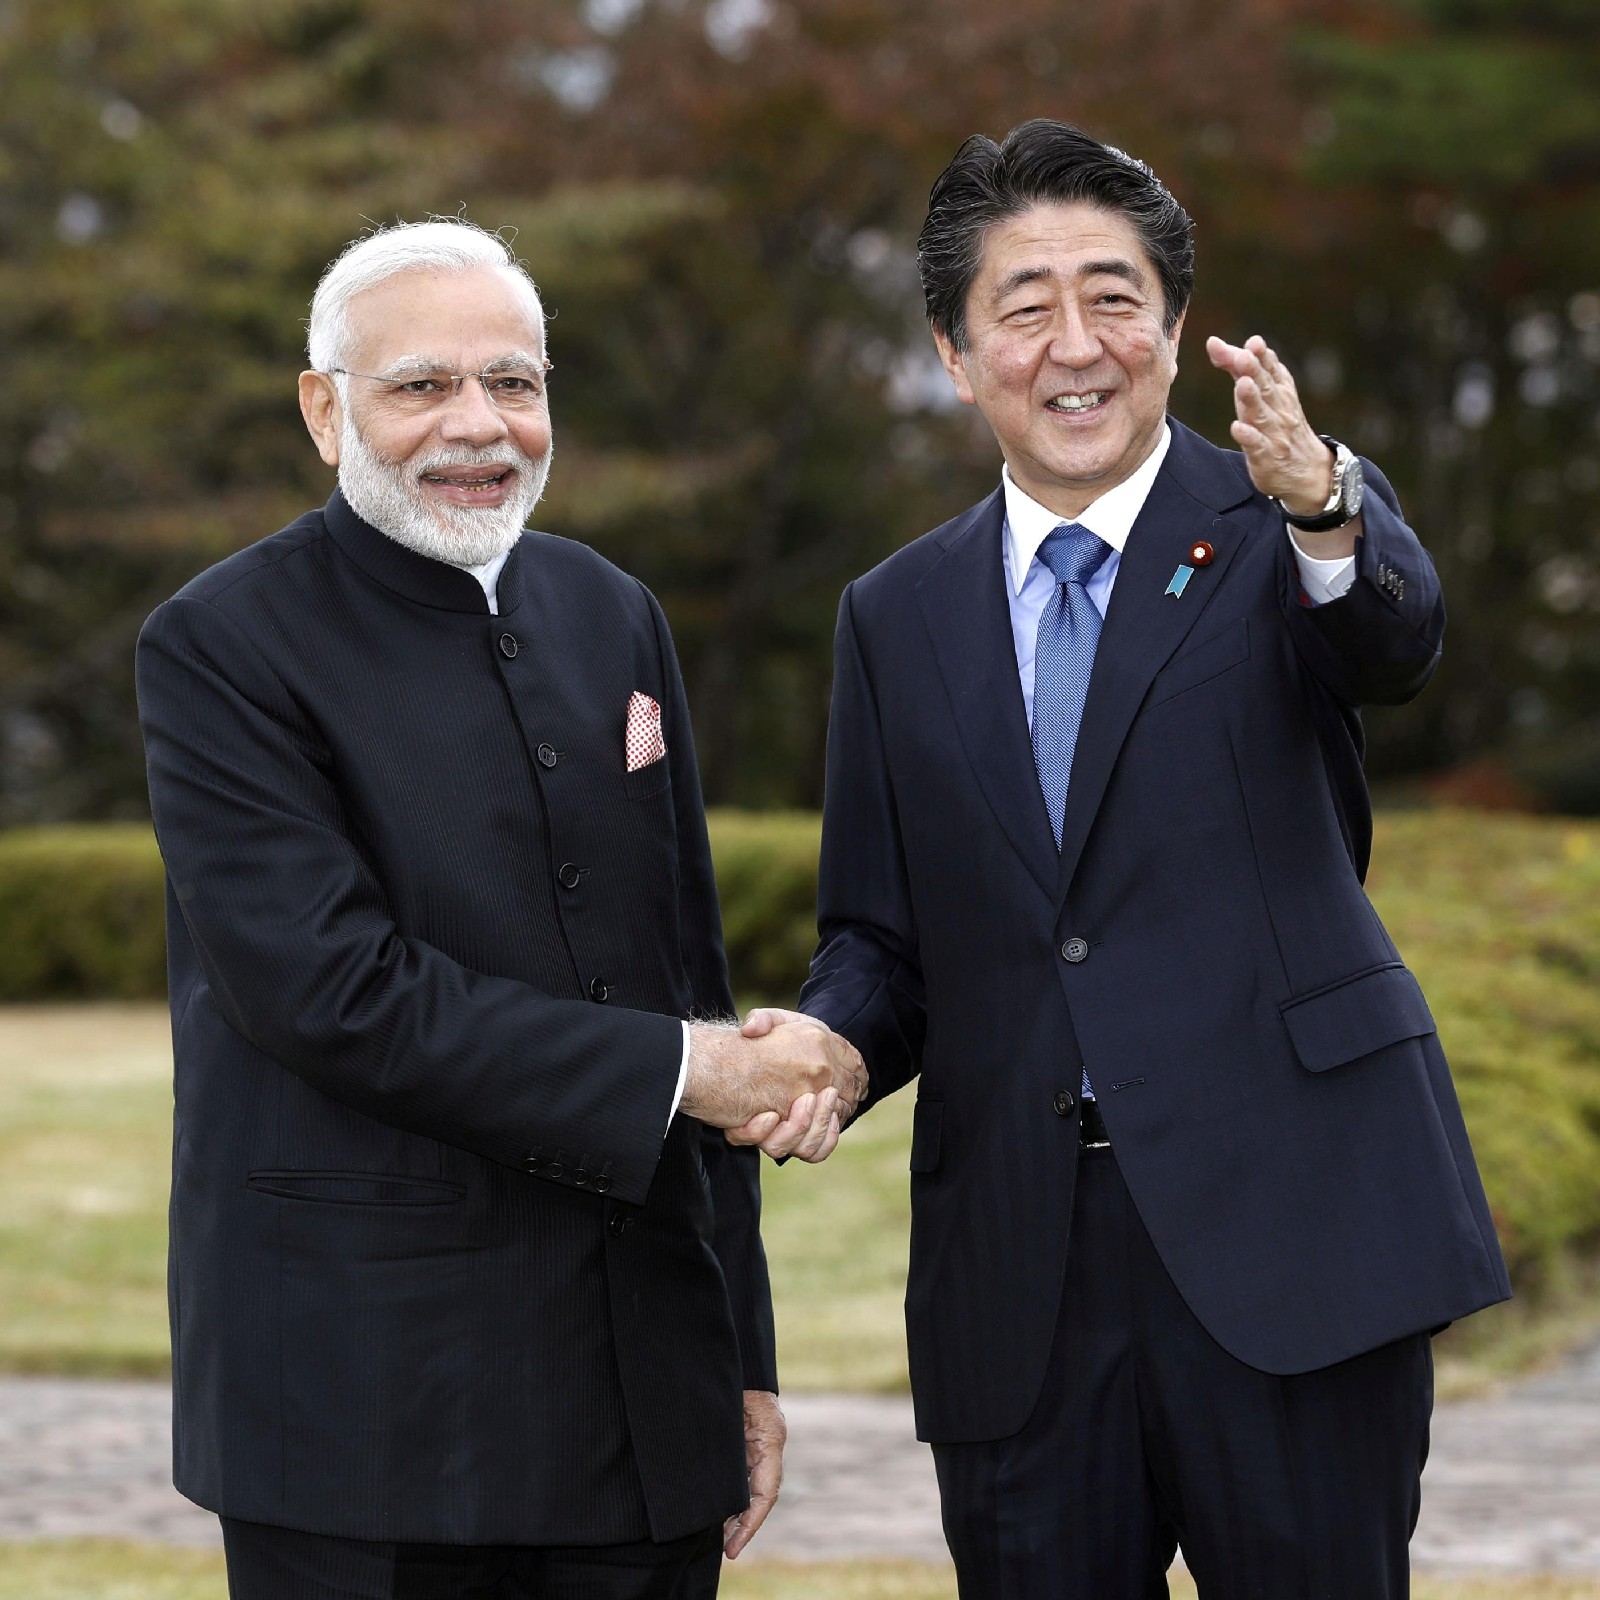 This is really personal," How the World Reacted to PM Modi's Heartfelt Tribute to Shinzo Abe